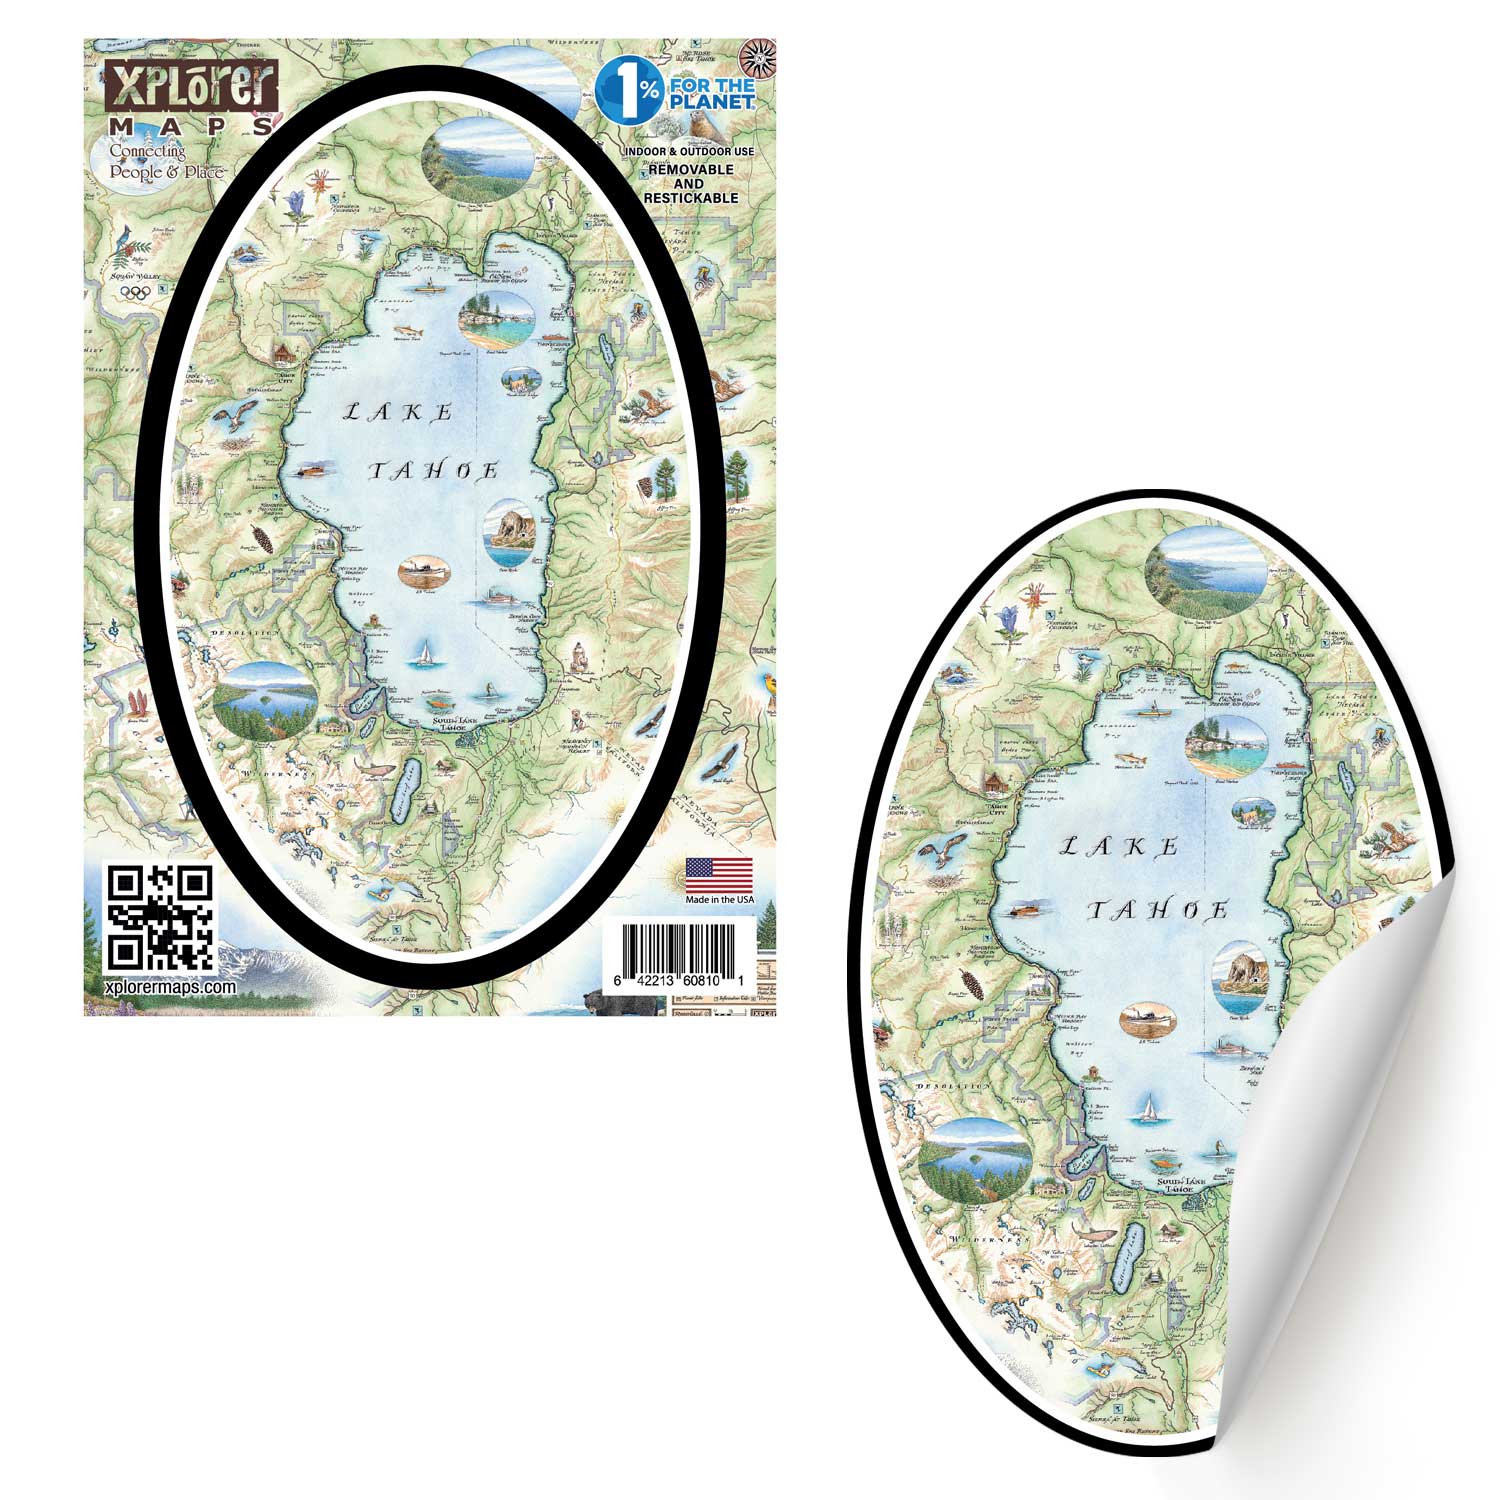 Lake Tahoe Map Stickers by Xplorer Maps.  The map features the land's topography along with the area's flora and fauna, such as Emerald Bay, Cove Rock, Thunderbird Lodge, and Cal Neva Lodge & Resort. A hand-illustrated black bear with cubs is in the bottom right corner. 